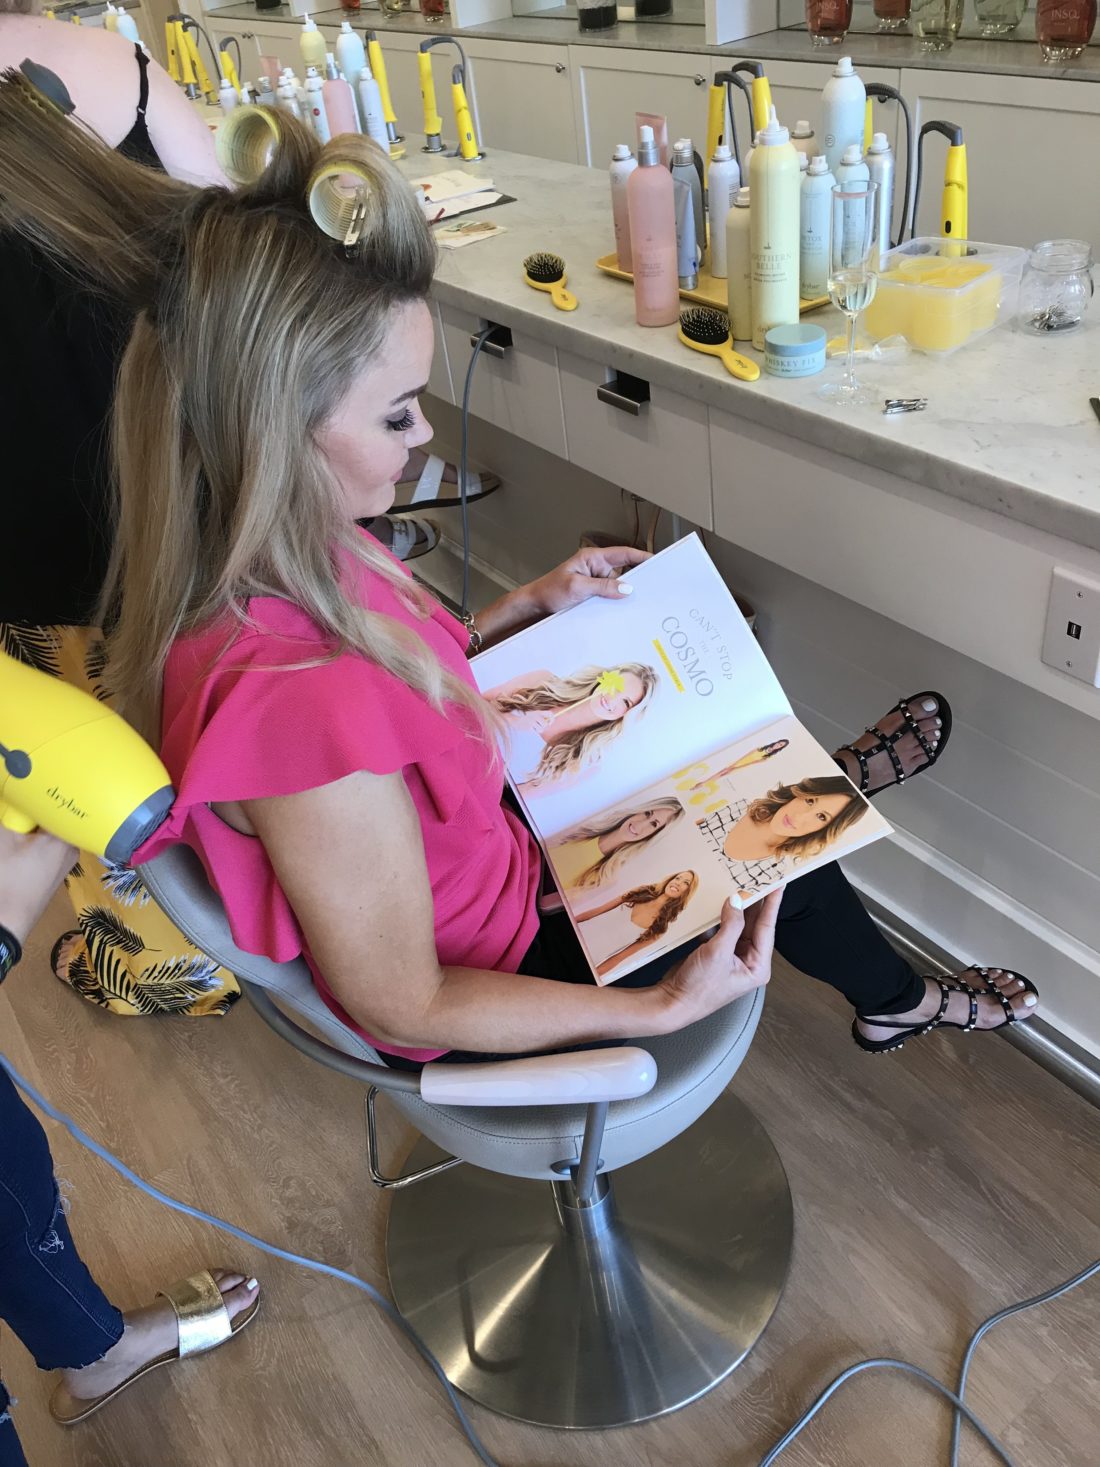 My First Blowout at Drybar| Everything You Need to Know